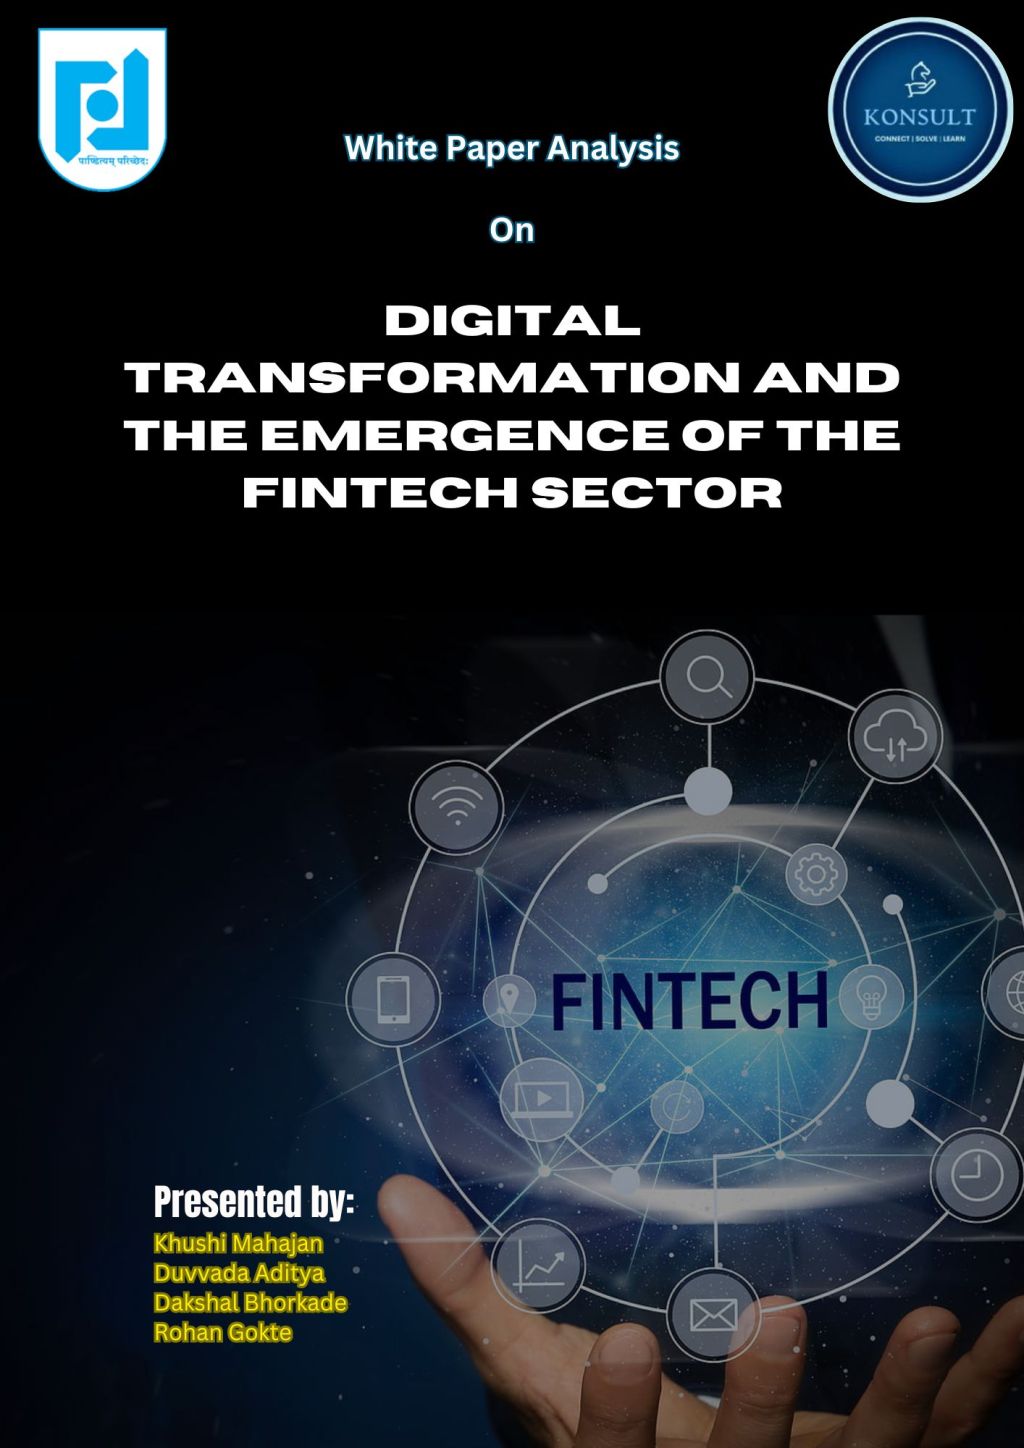 Digital Transformation and the Emergence of Fintech Sector